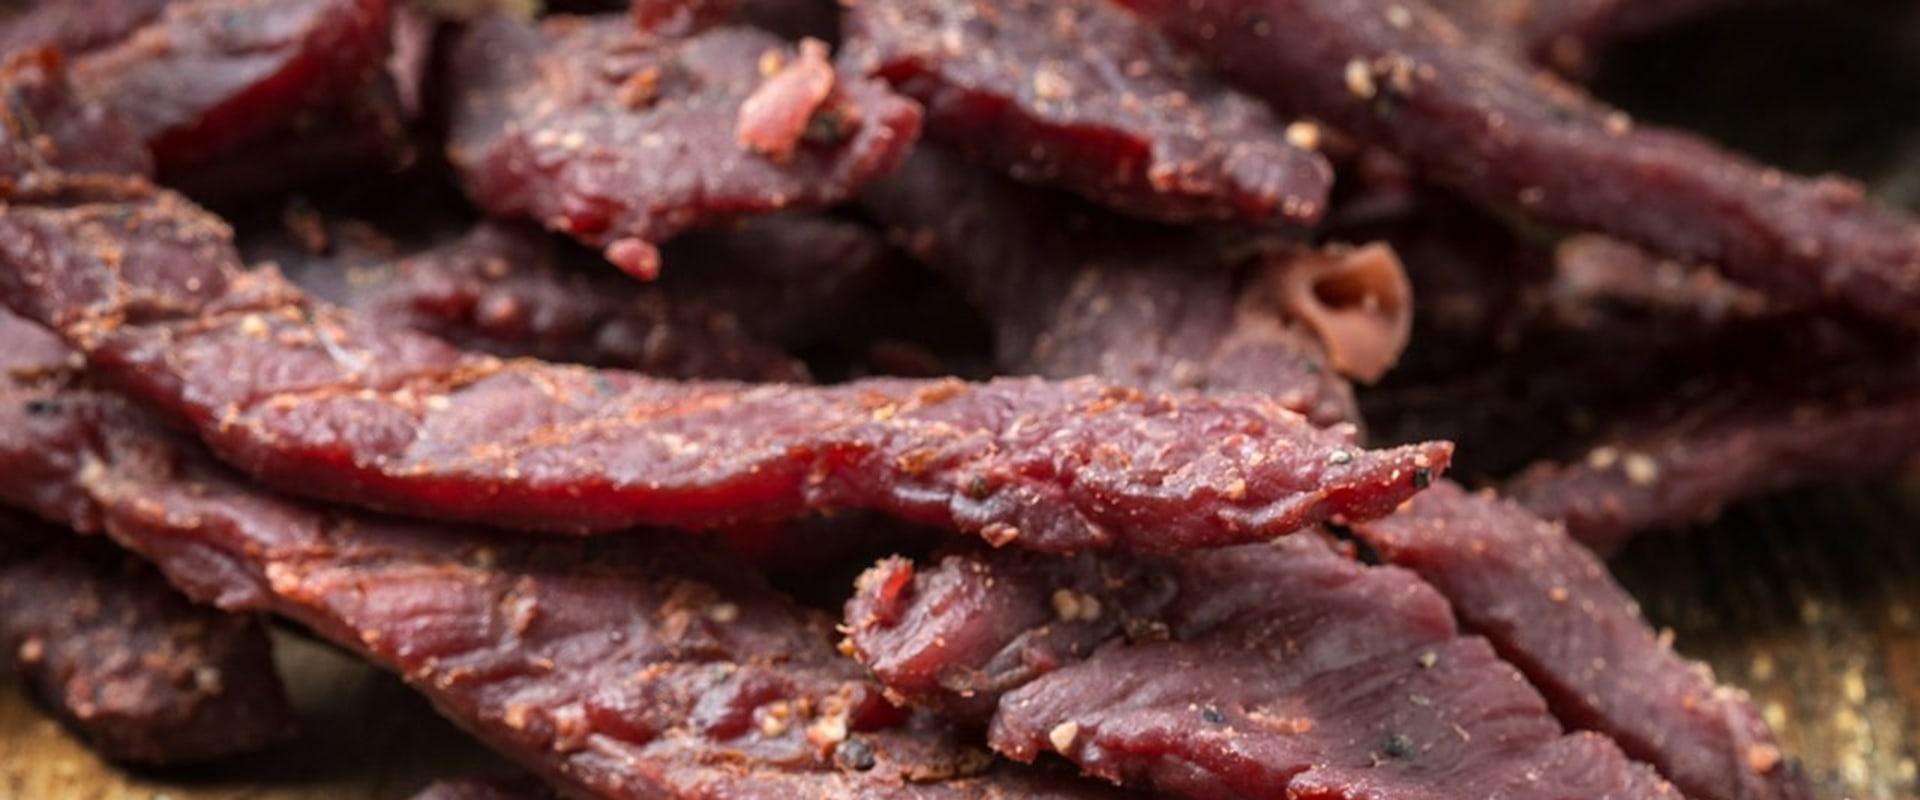 How much beef jerky can you eat a day?